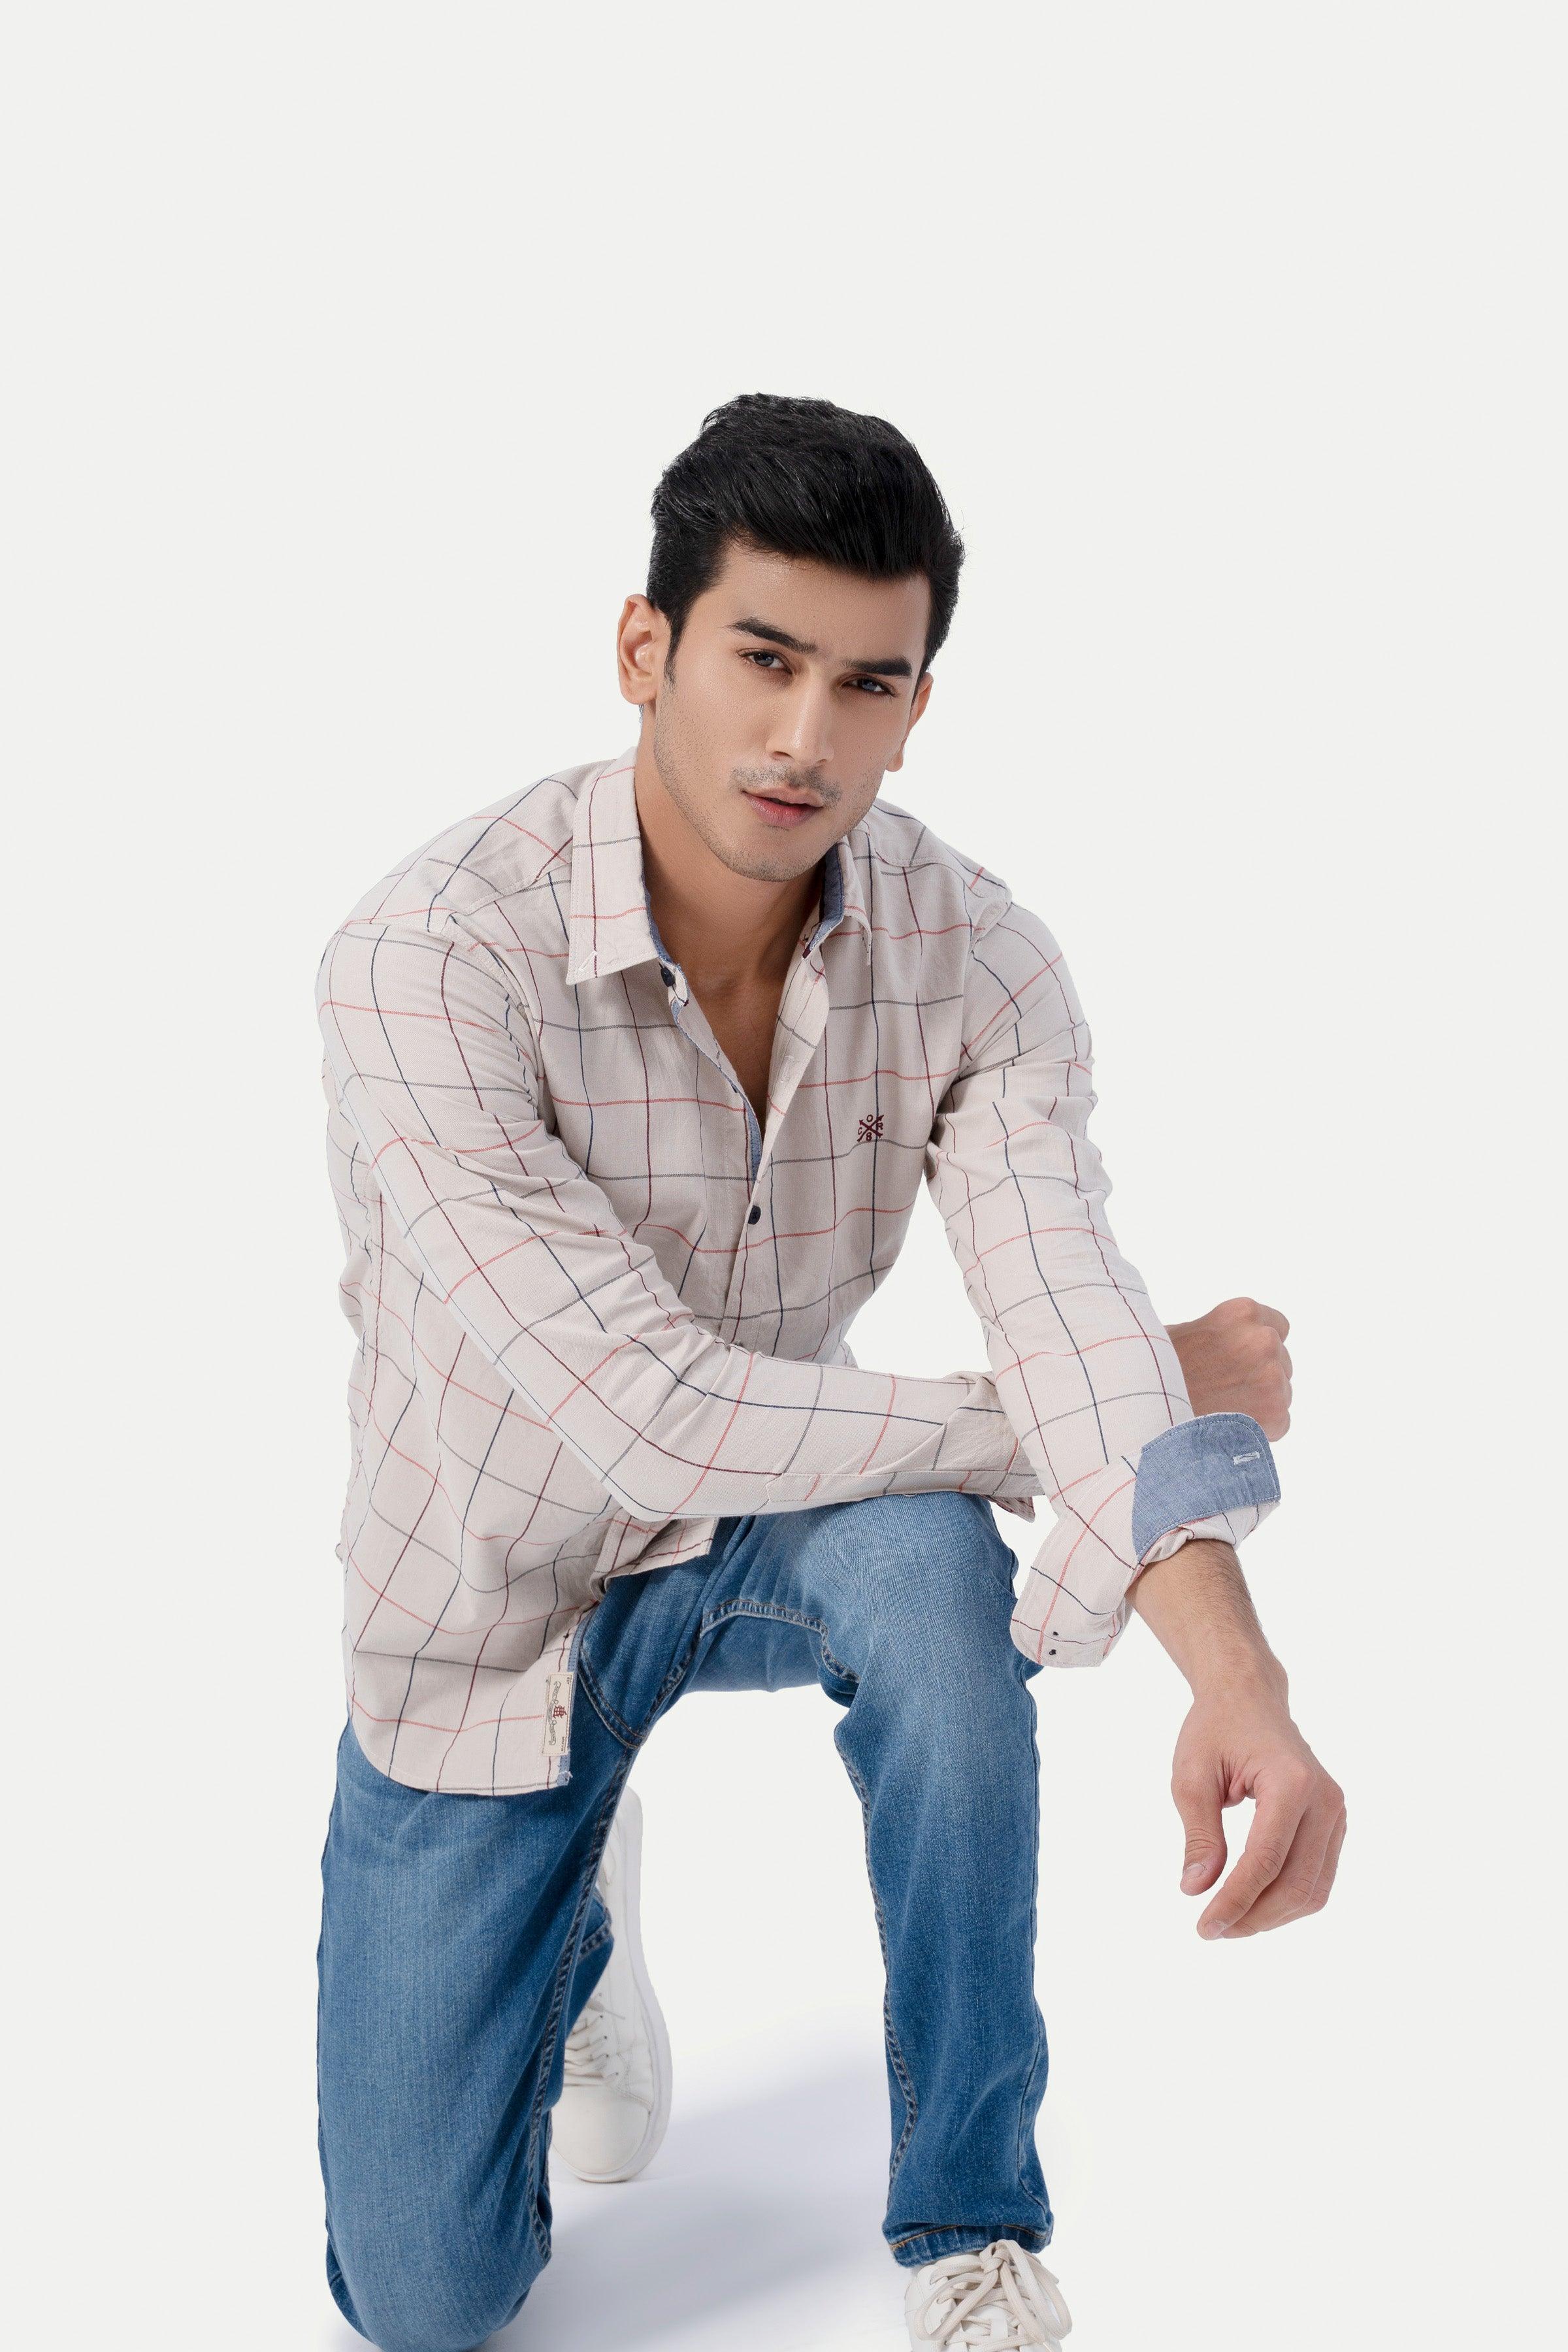 CASUAL SHIRT BEIGE CHECK at Charcoal Clothing